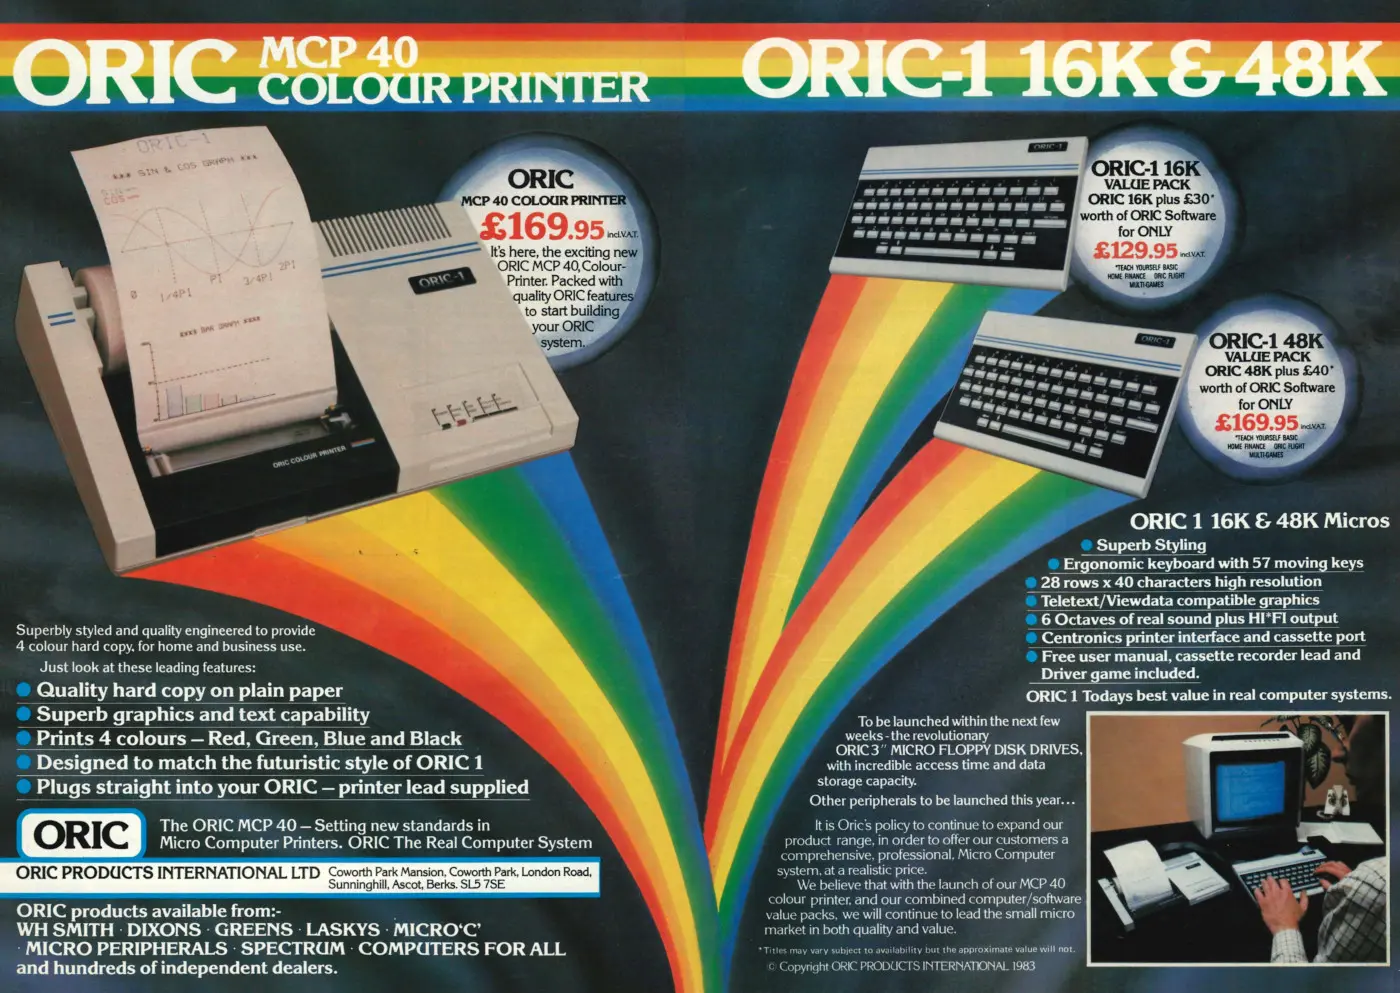 Oric Advert: Oric-1 16K and 48K Micros, from Personal Computer News, 18th August 1983